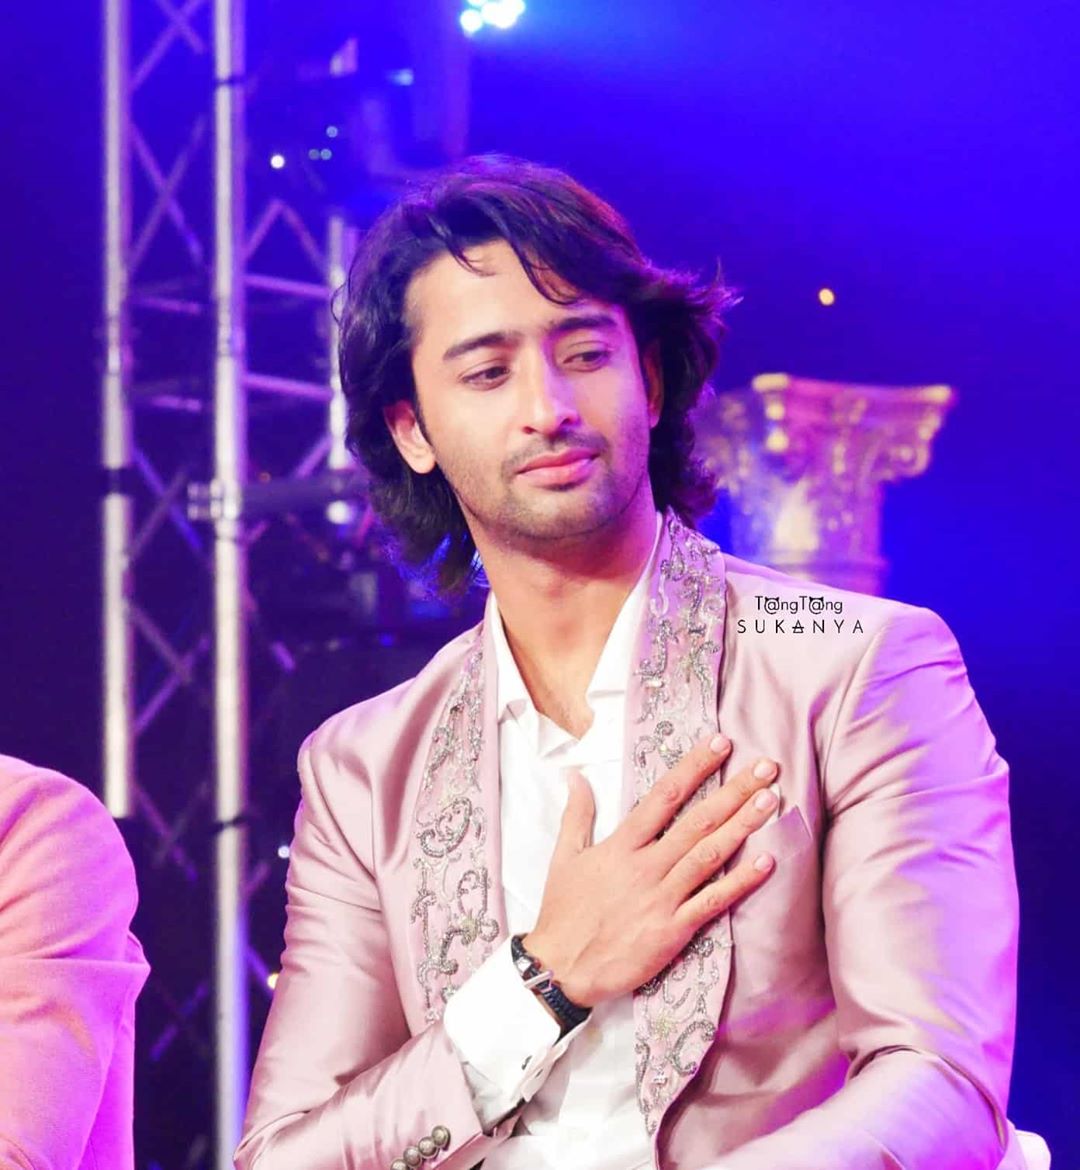 Thread of ALL Our Super Shah's Shows, Movies, Serials, Music Videos.. Which he has Done in Last 11 Years.. of his Journey... His 11 Years Journey is Awe-Inspiring from "*Small Village Guy to International Star*"  #11YearsOfShaheerSheikh  @Shaheer_S |  #ShaheerSheikh